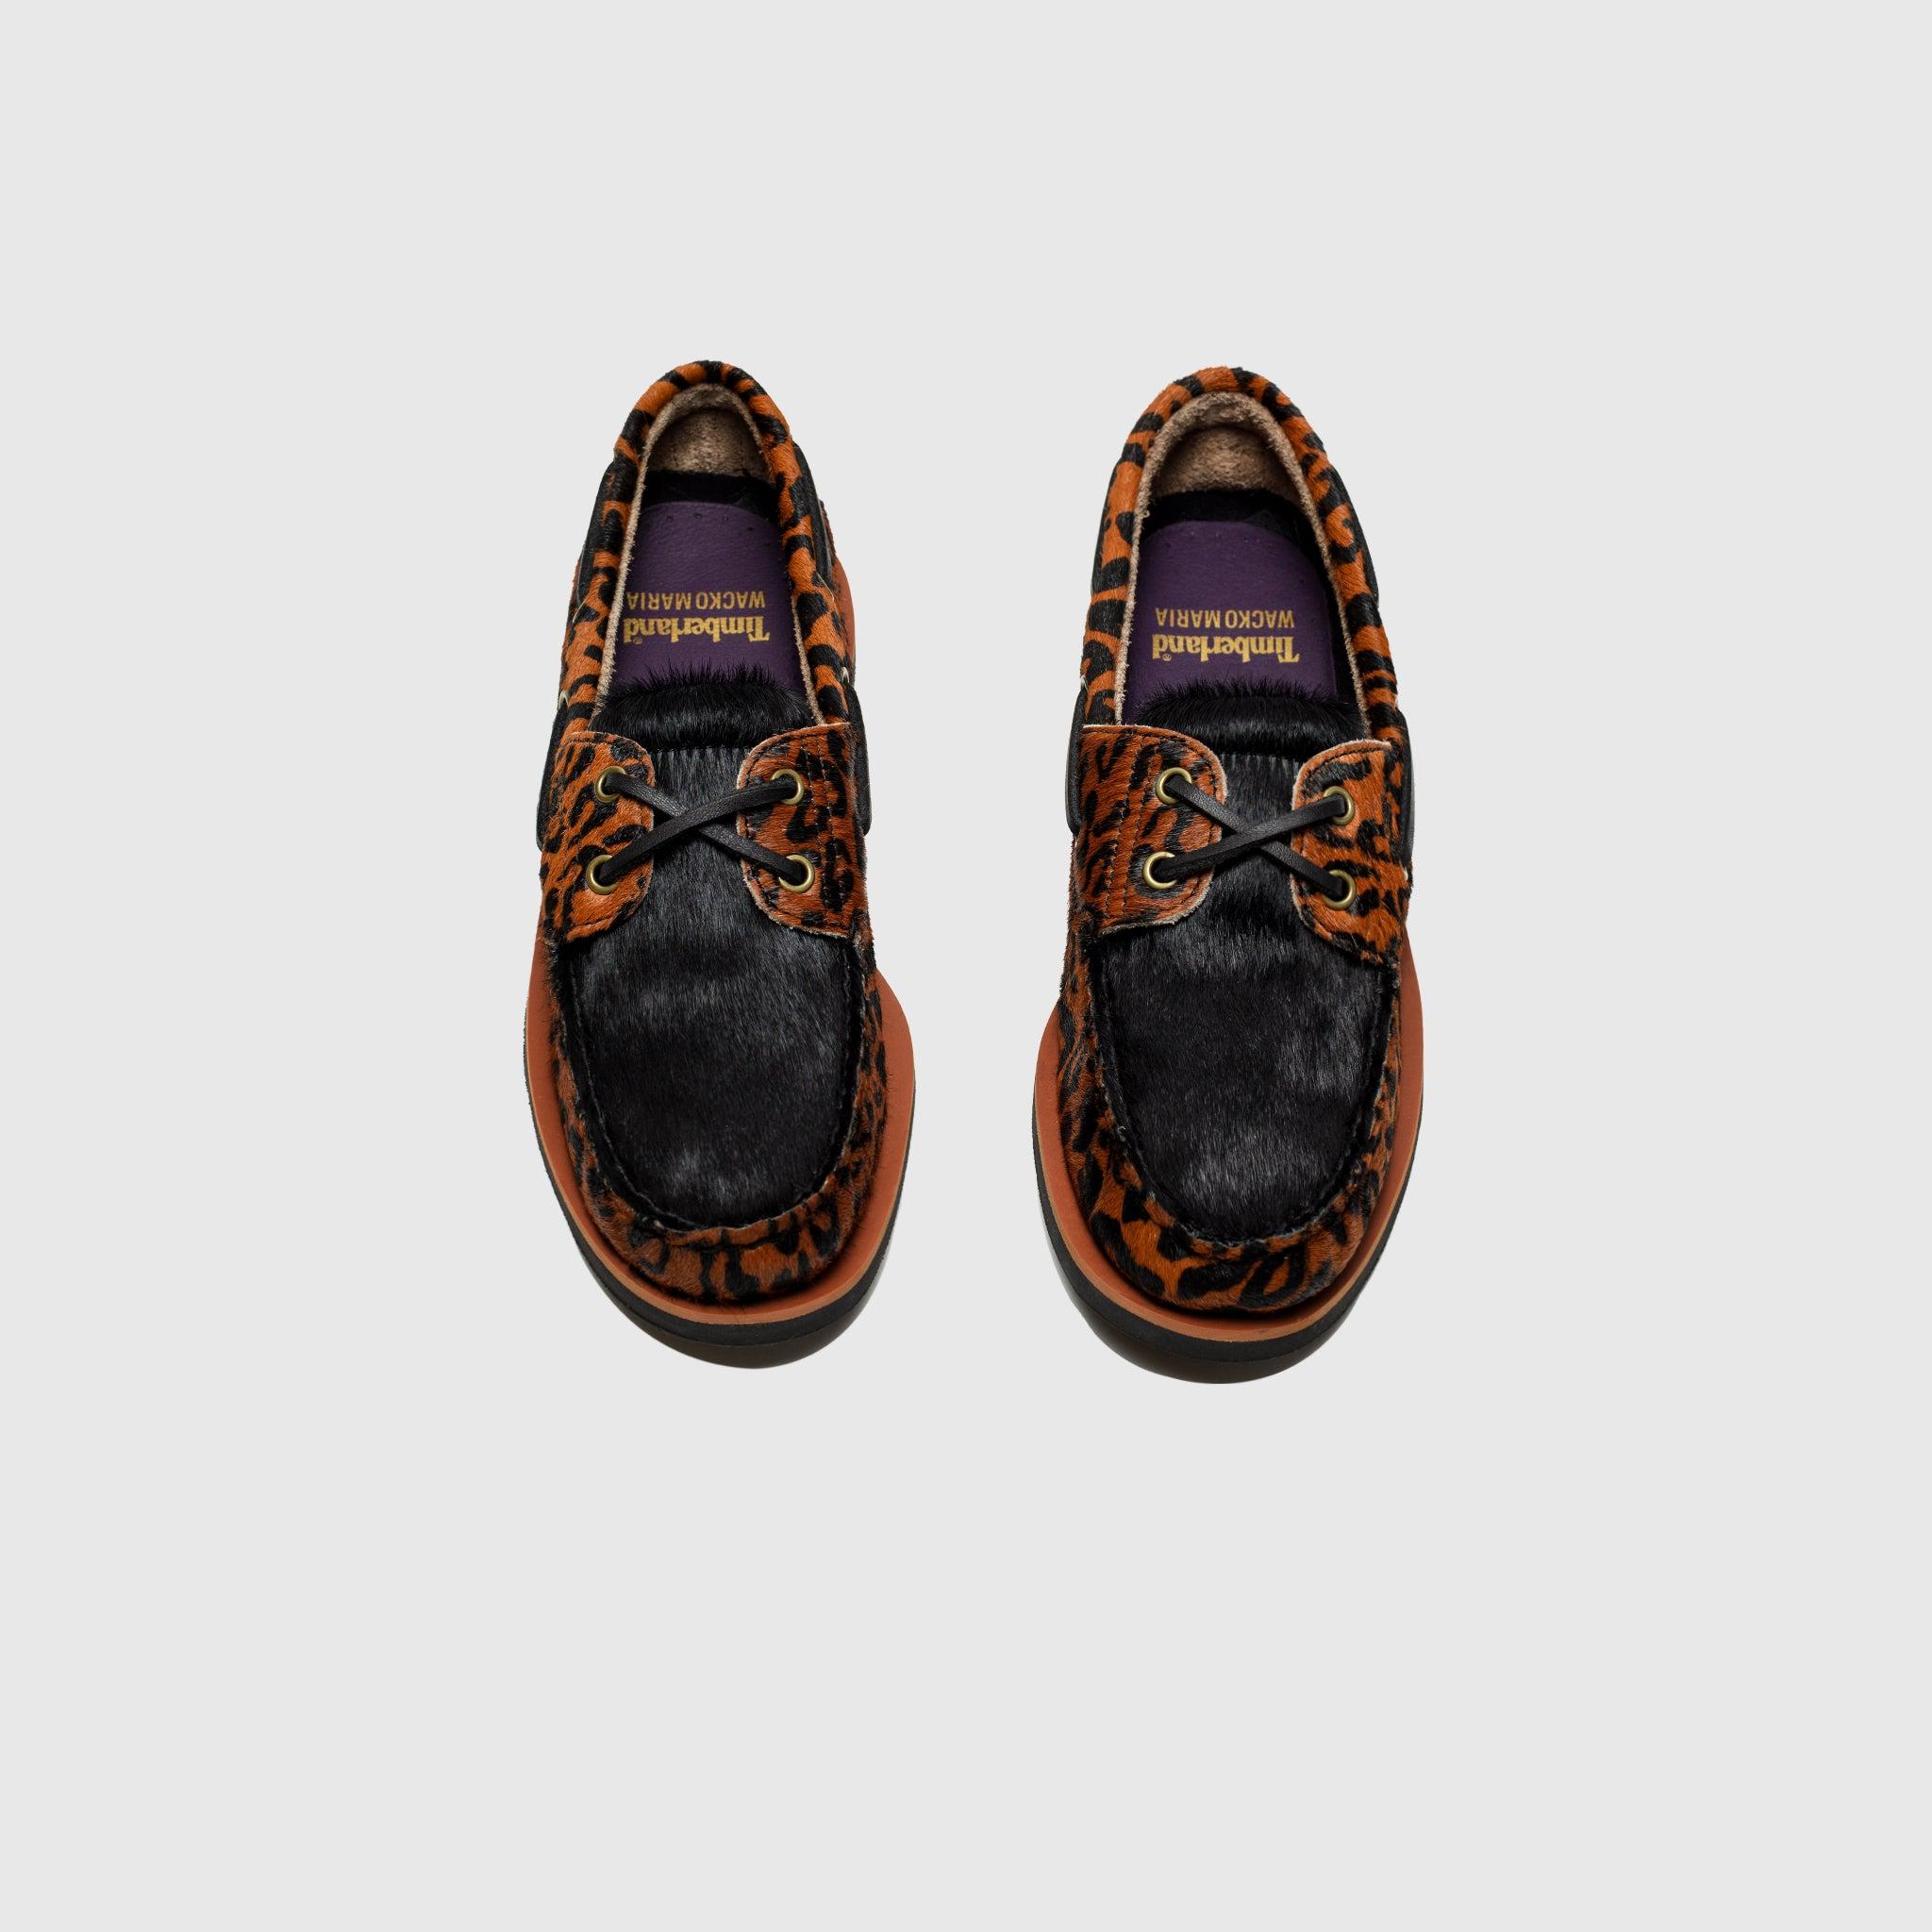 Timberland Classic Two Eye Boat Shoes X Wacko Maria in Brown for 